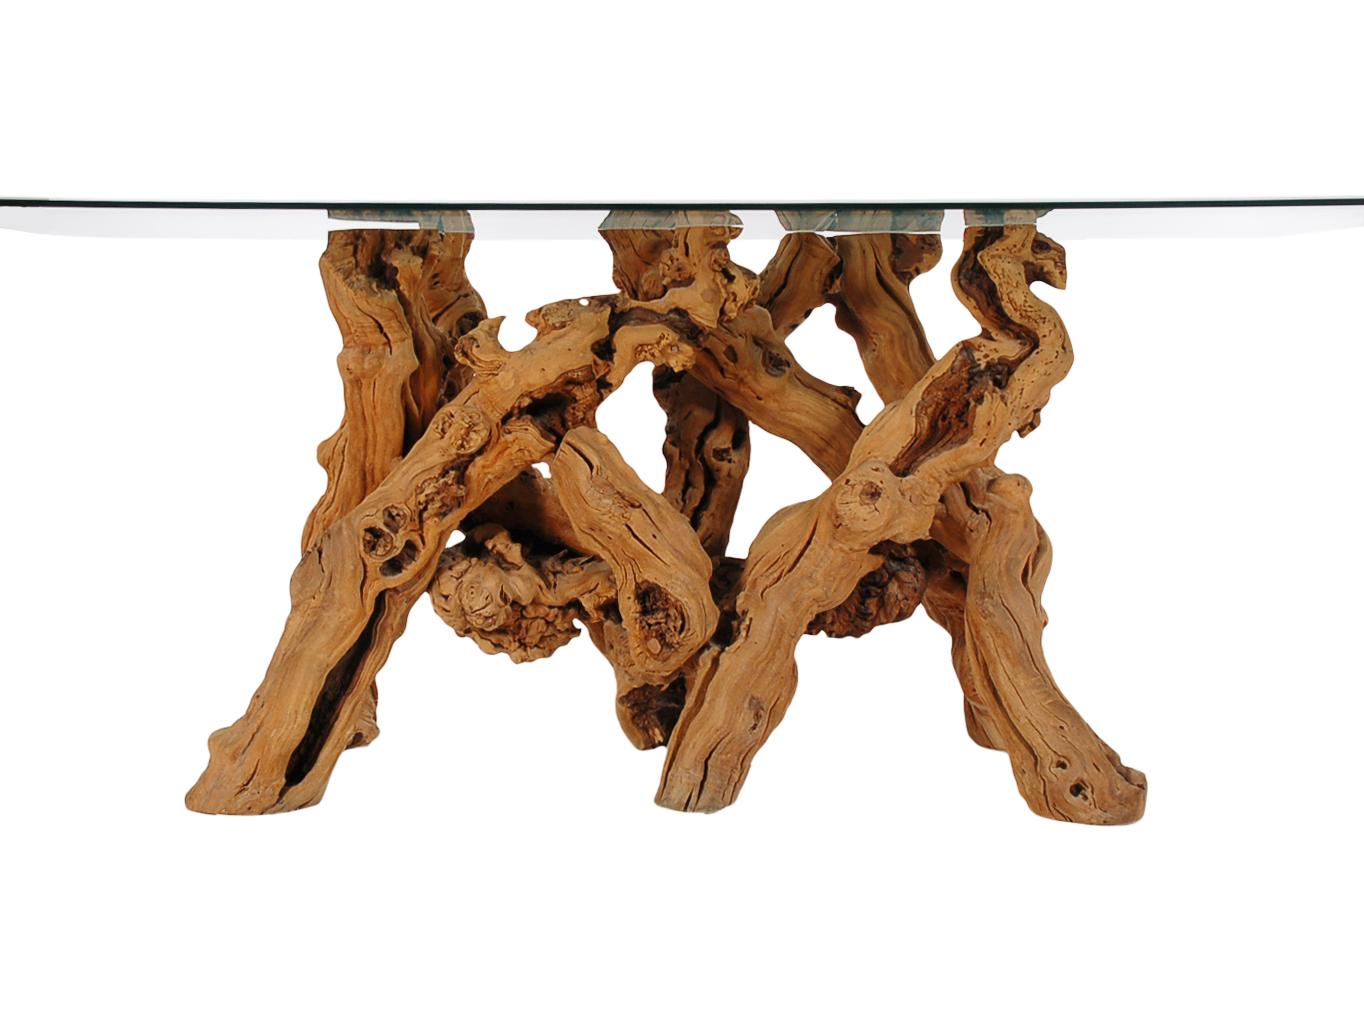 A large vintage dining table or conference table that was studio made in the early 1970s. It features a sculptural solid driftwood base with large glass top.